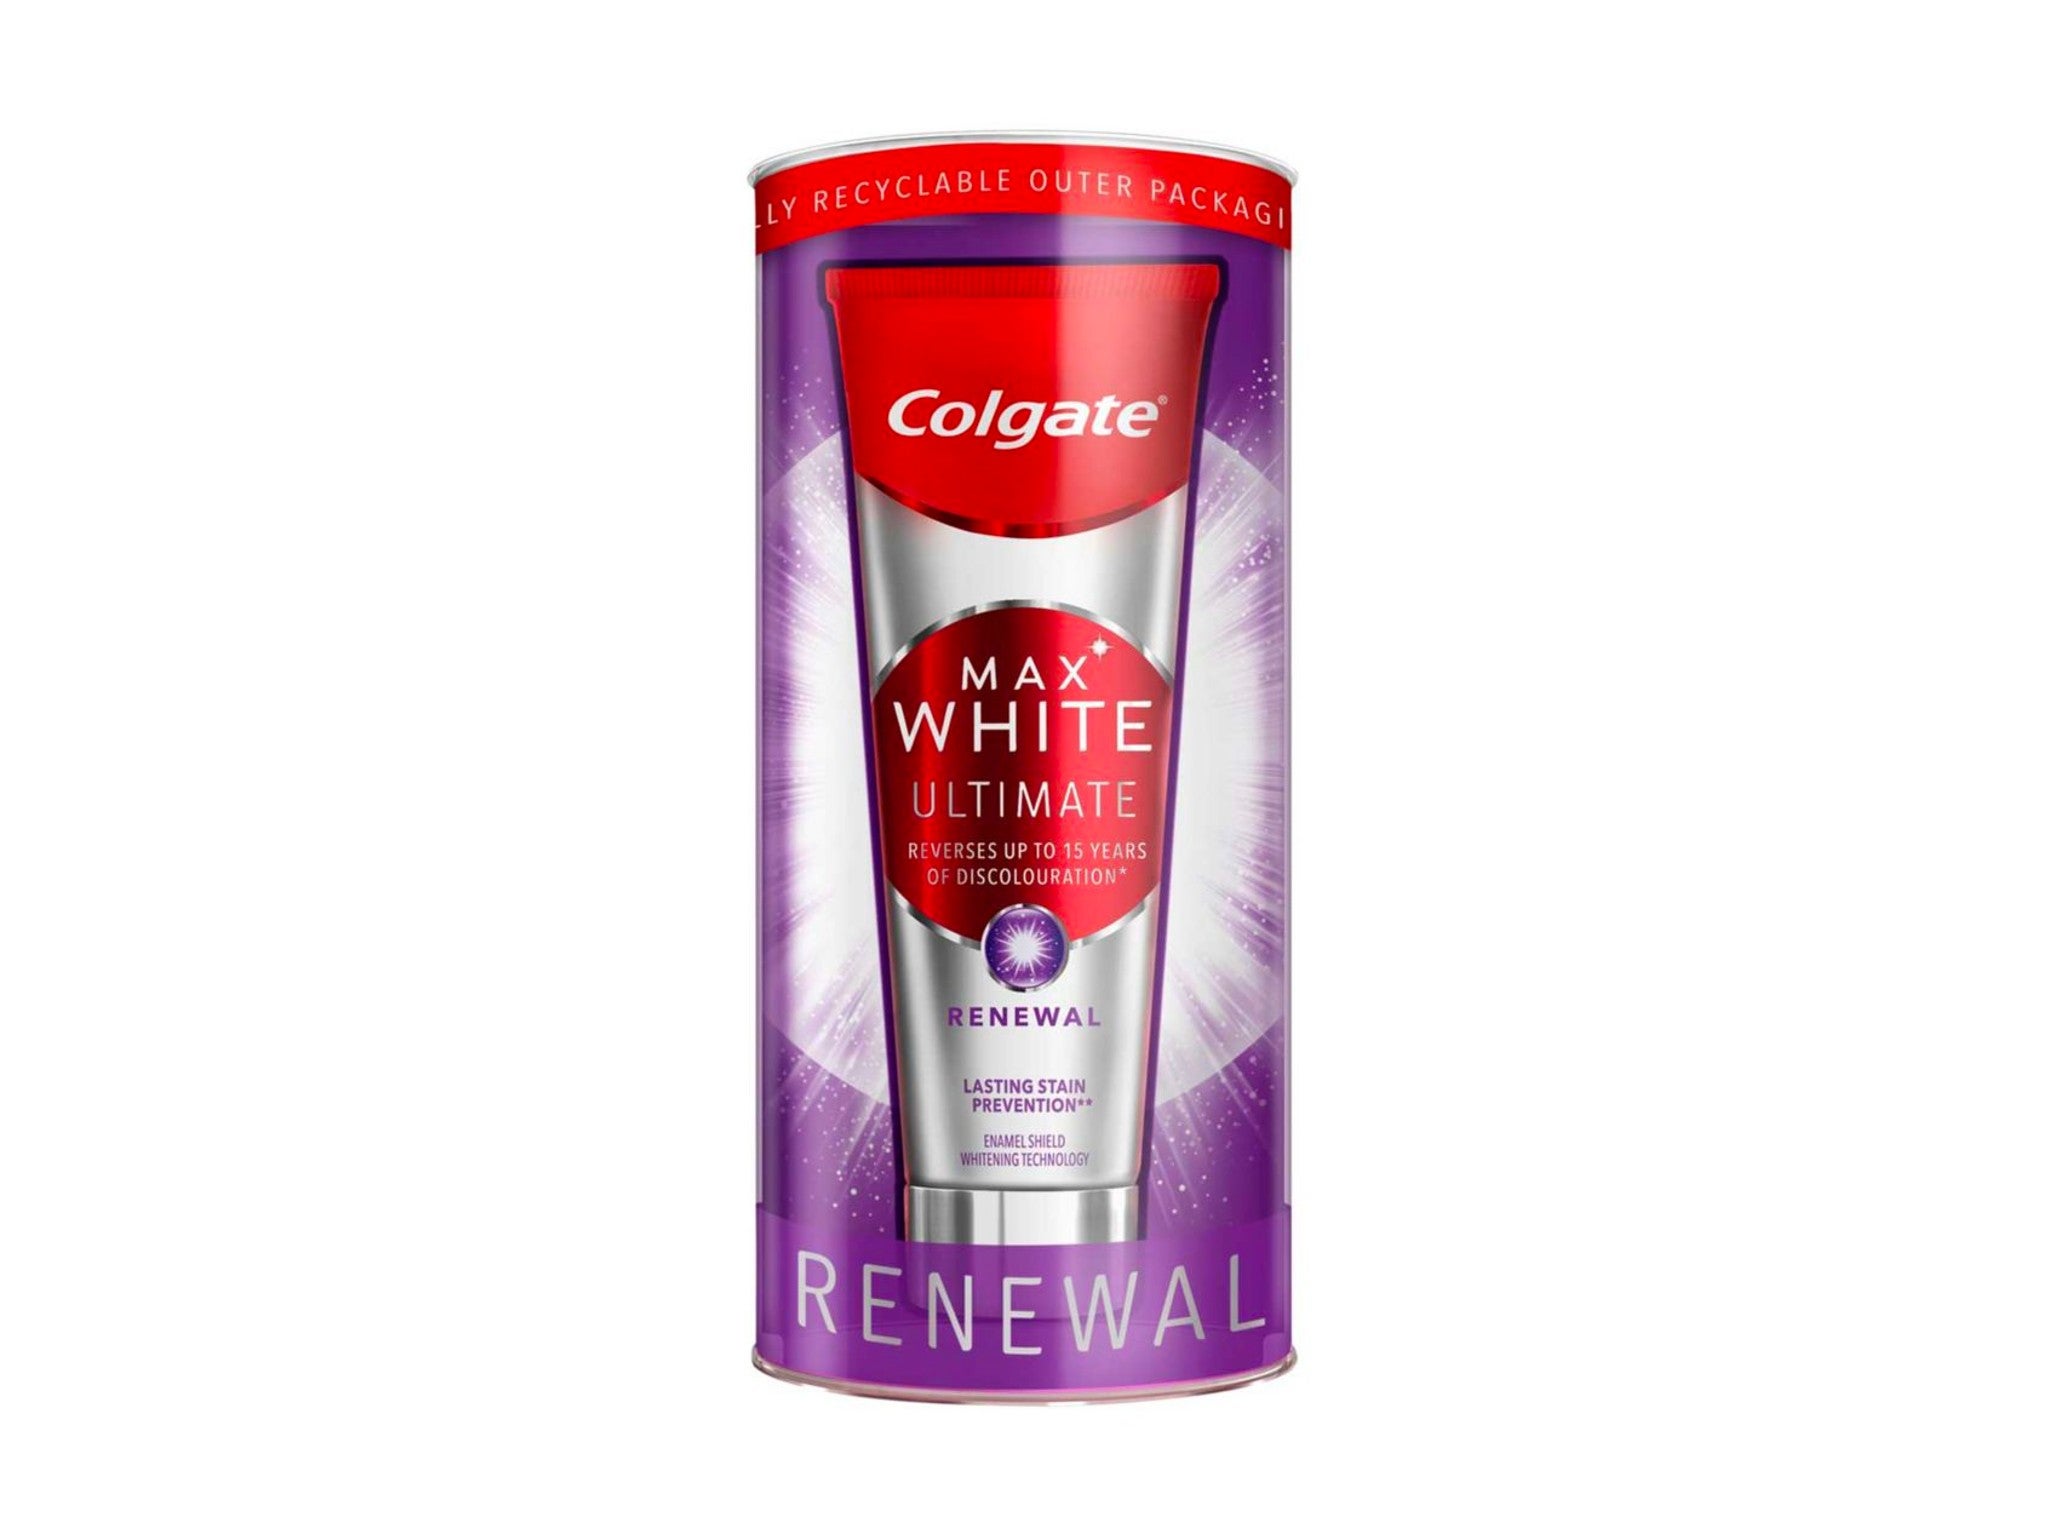 Colgate max white ultimate renewal whitening toothpaste indybest